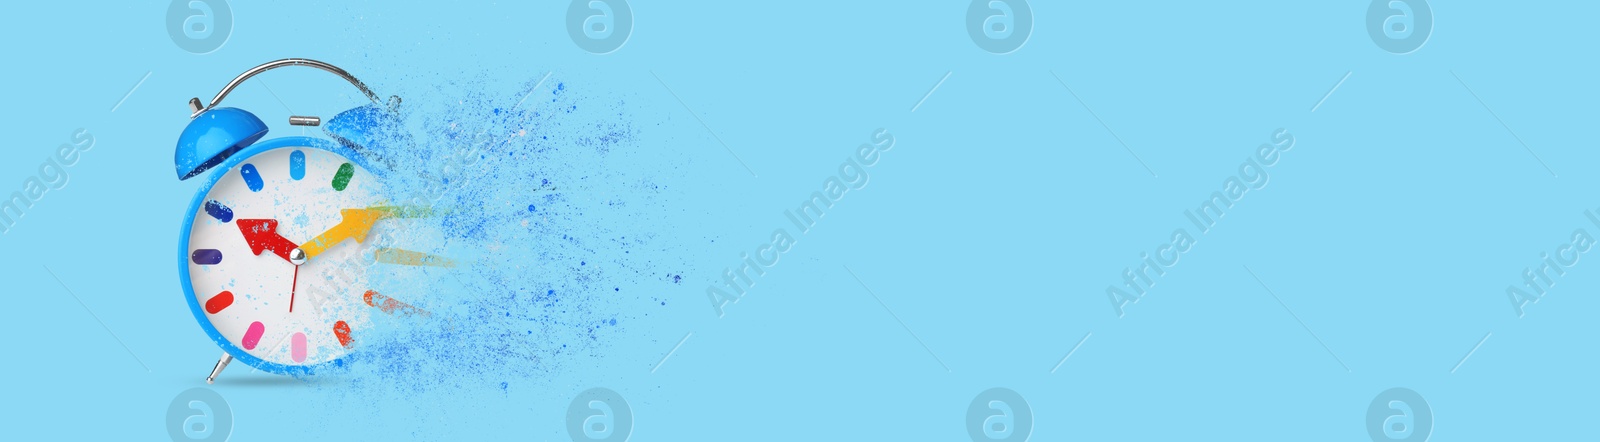 Image of Bright alarm clock dissolving on light blue background, banner design with space for text. Flow of time